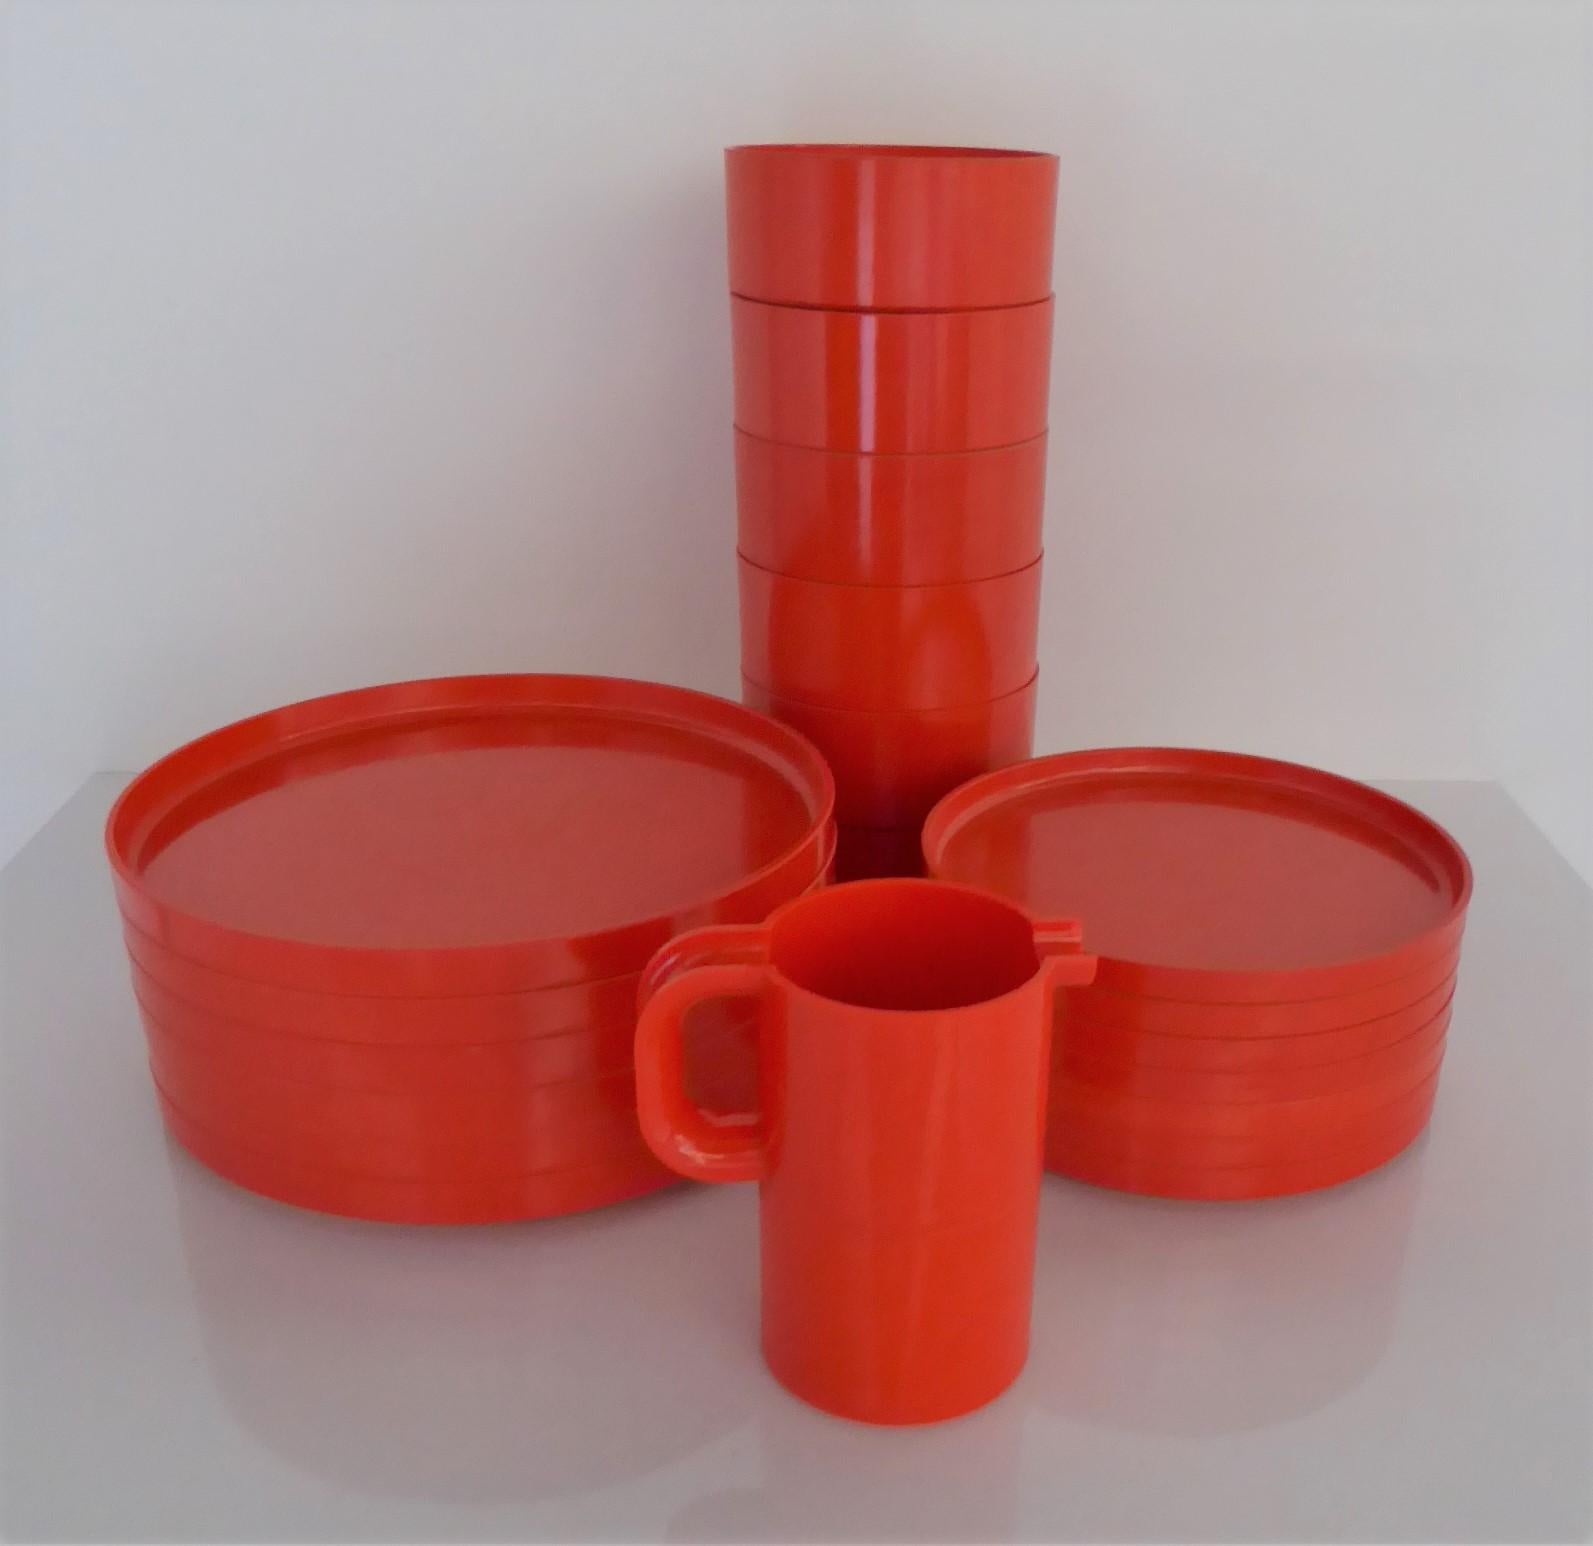 Mid-20th Century Massimo Vignelli for Heller Set of Max 2 ABS Dinnerware, Italy 1960s - 22 Pieces